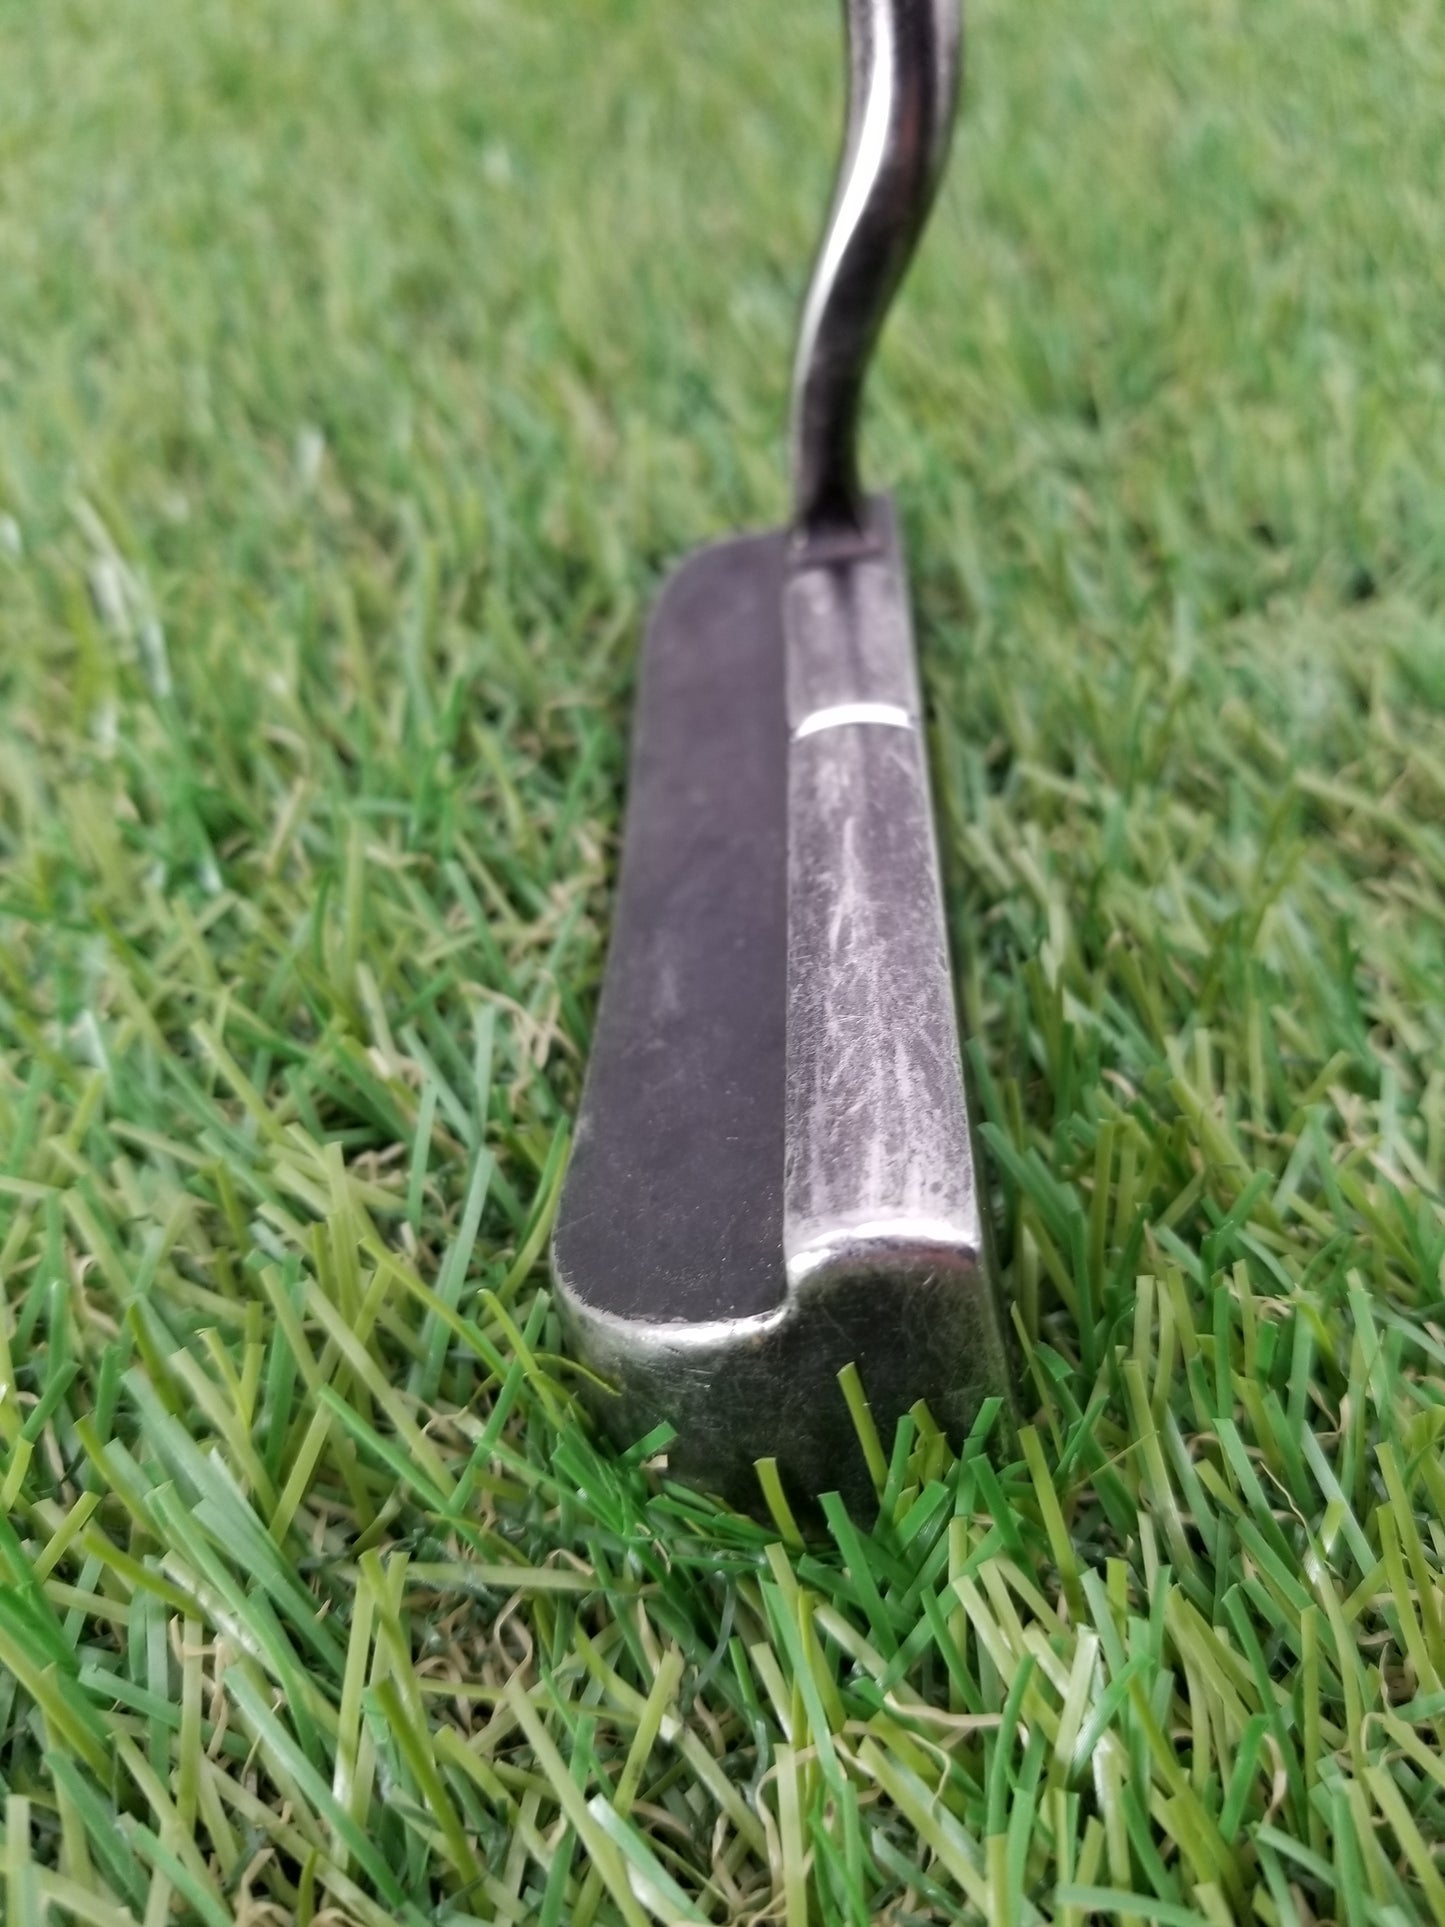 TOMMY ARMOUR 845 PUTTER 34.5" GOOD